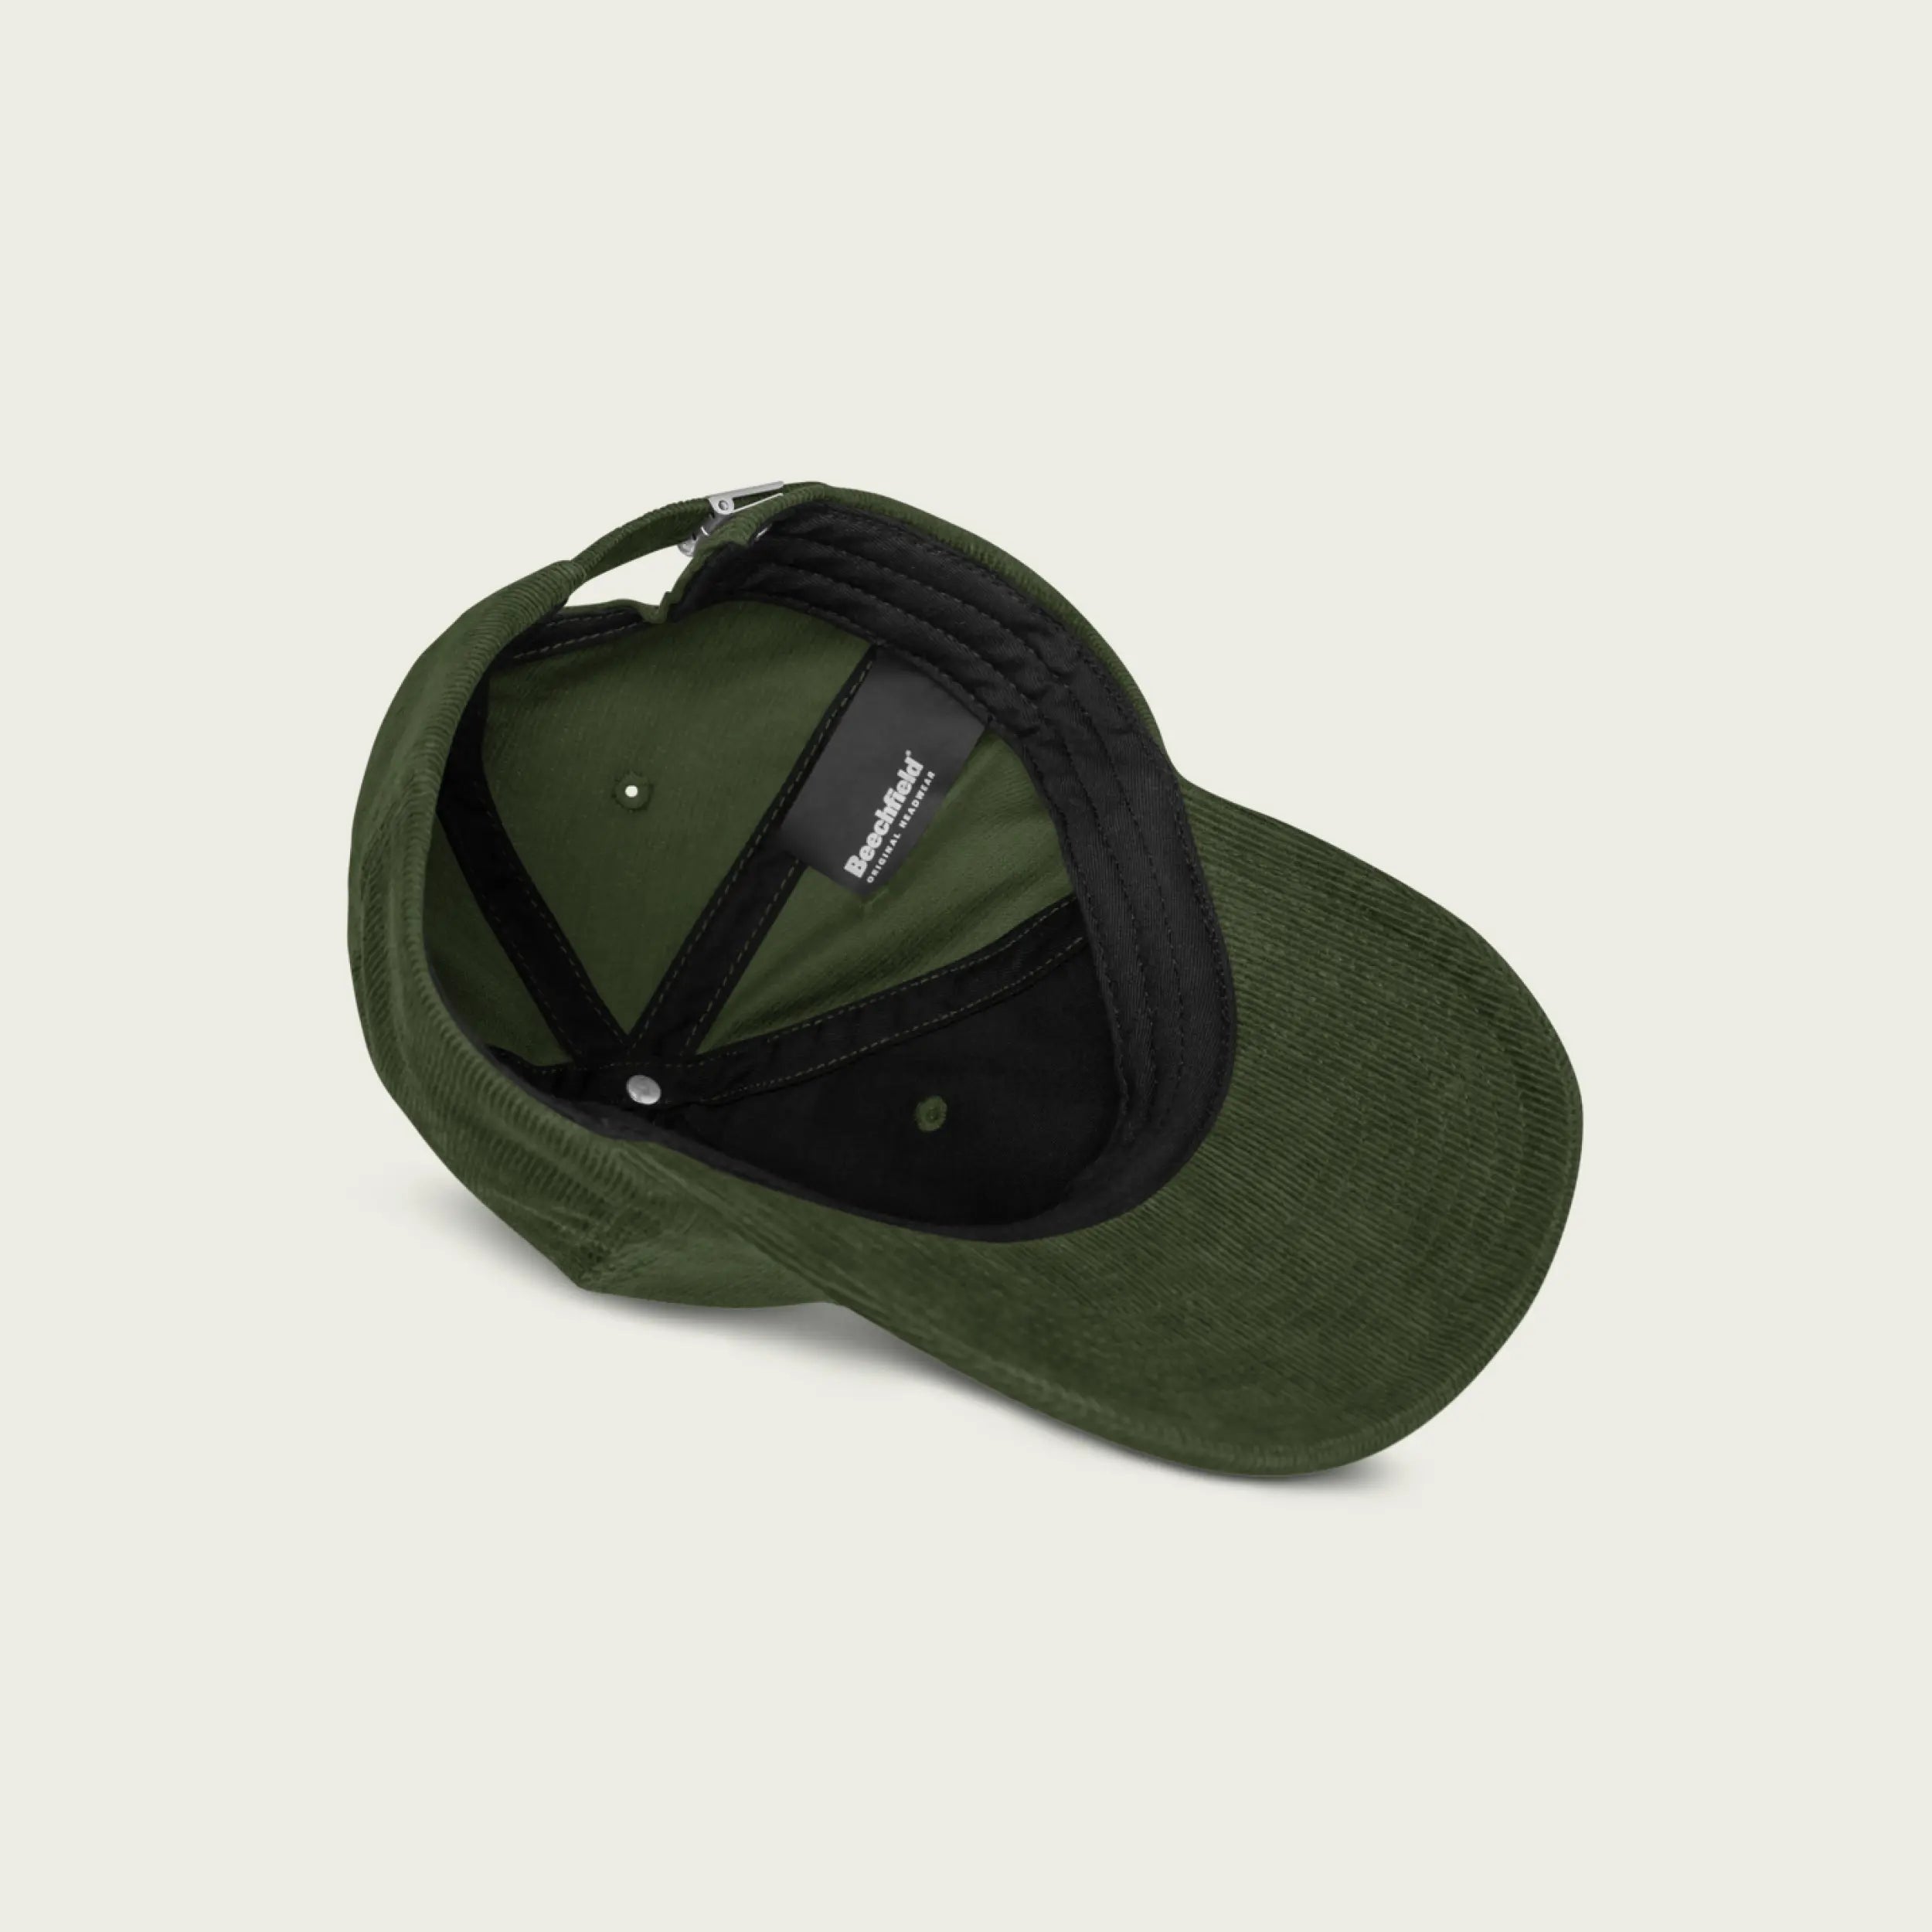 Mellowed out leisure ware with the 'Do Nothing' Green Corduroy Hat